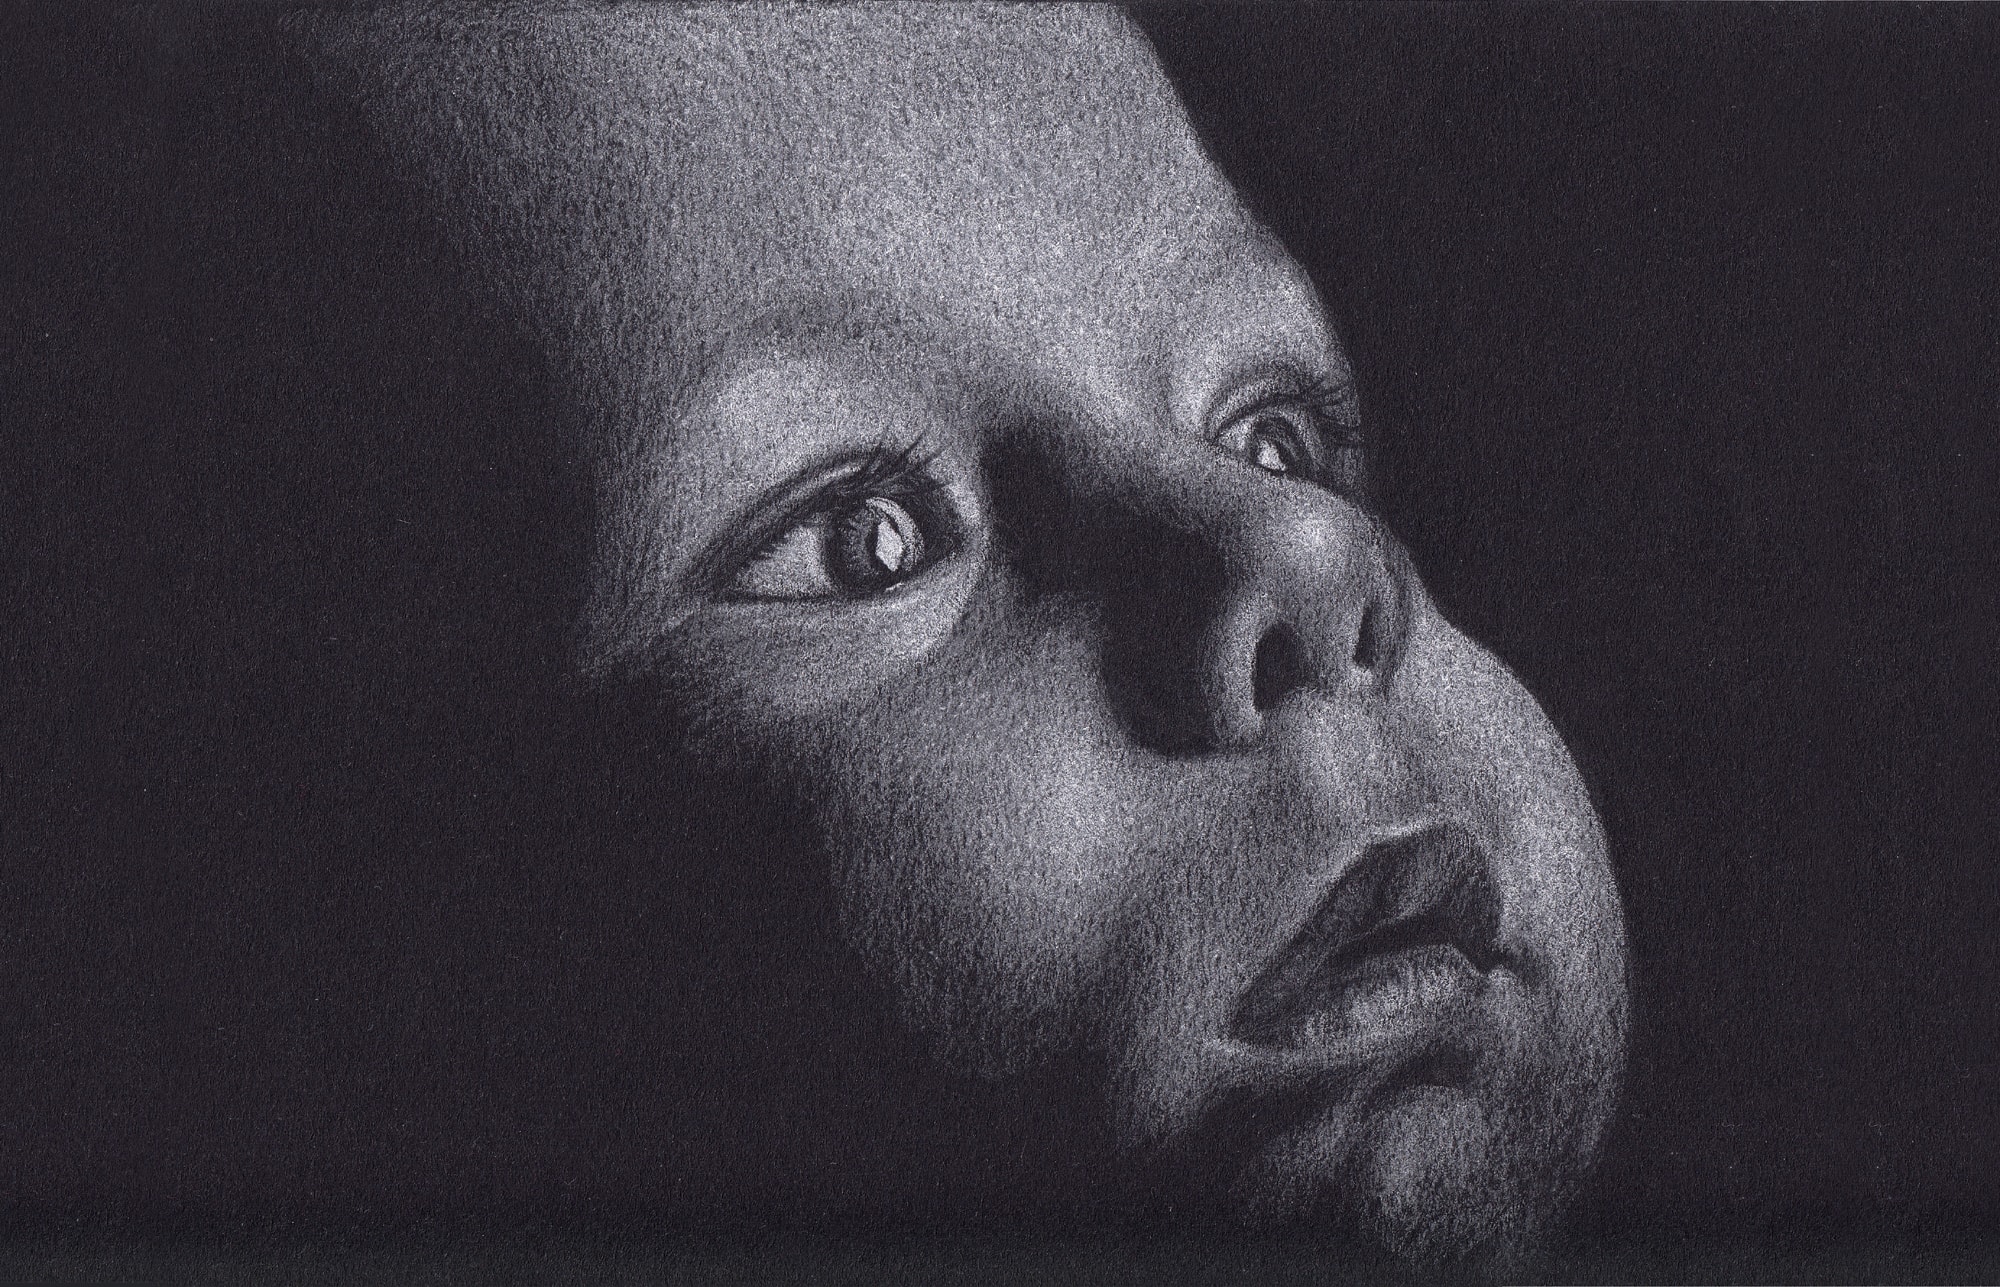 Draw A Portrait With White Pencil On Black Paper By Iiii Iiii